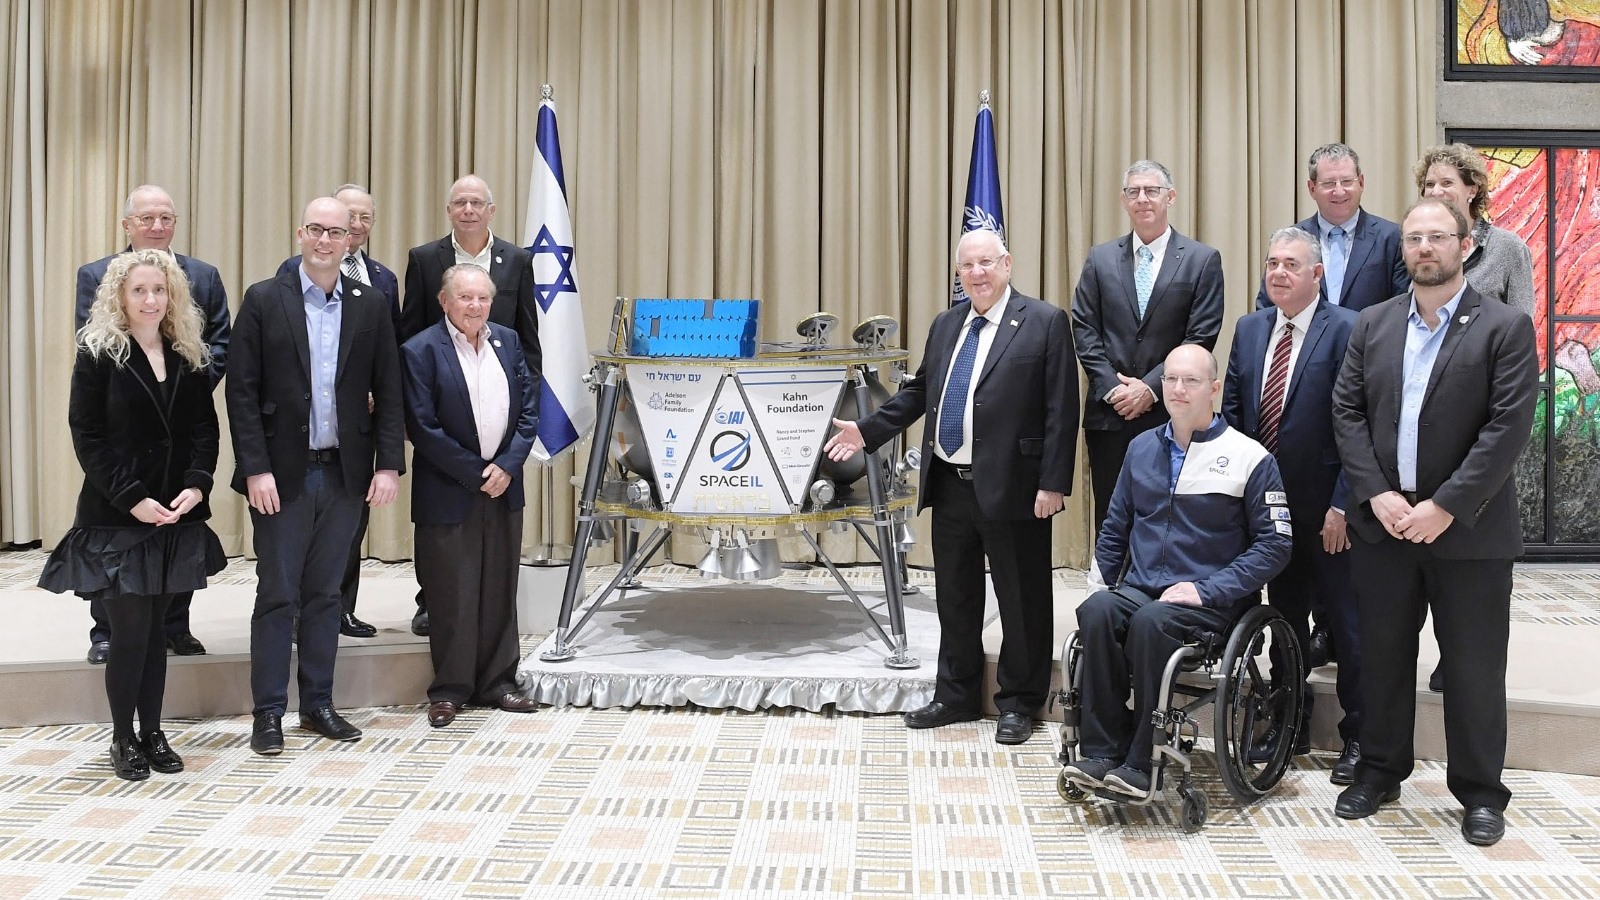 Israeli President Reuven Rivlin received SpaceIL’s Beresheet spacecraft as a national project in a meeting with leaders of SpaceIL and IAI, January 17, 2019. Photo by Amos Ben-Gershom/GPO